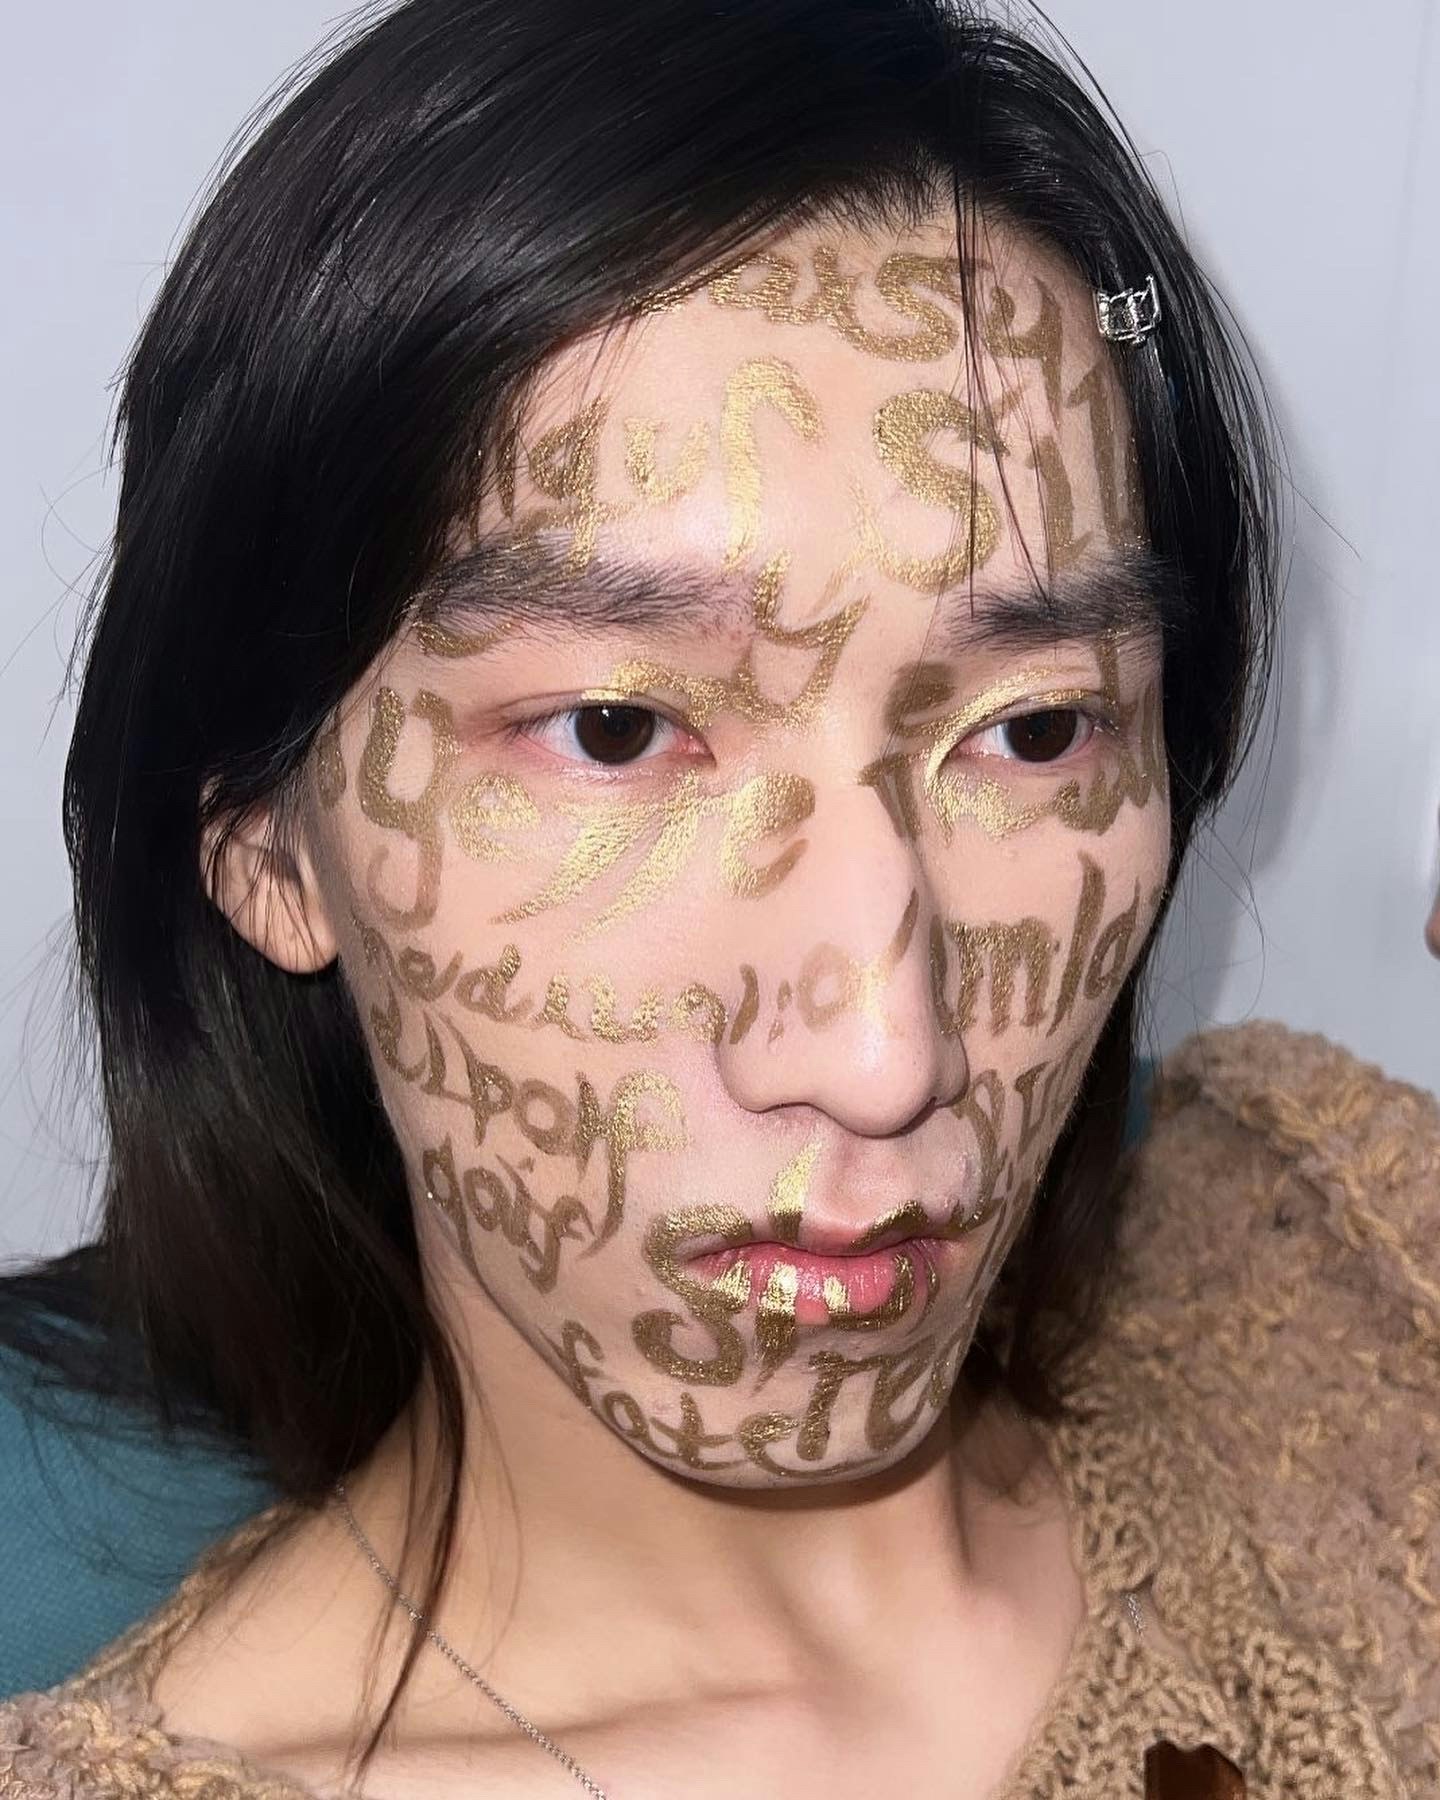 An image of Soda Choi